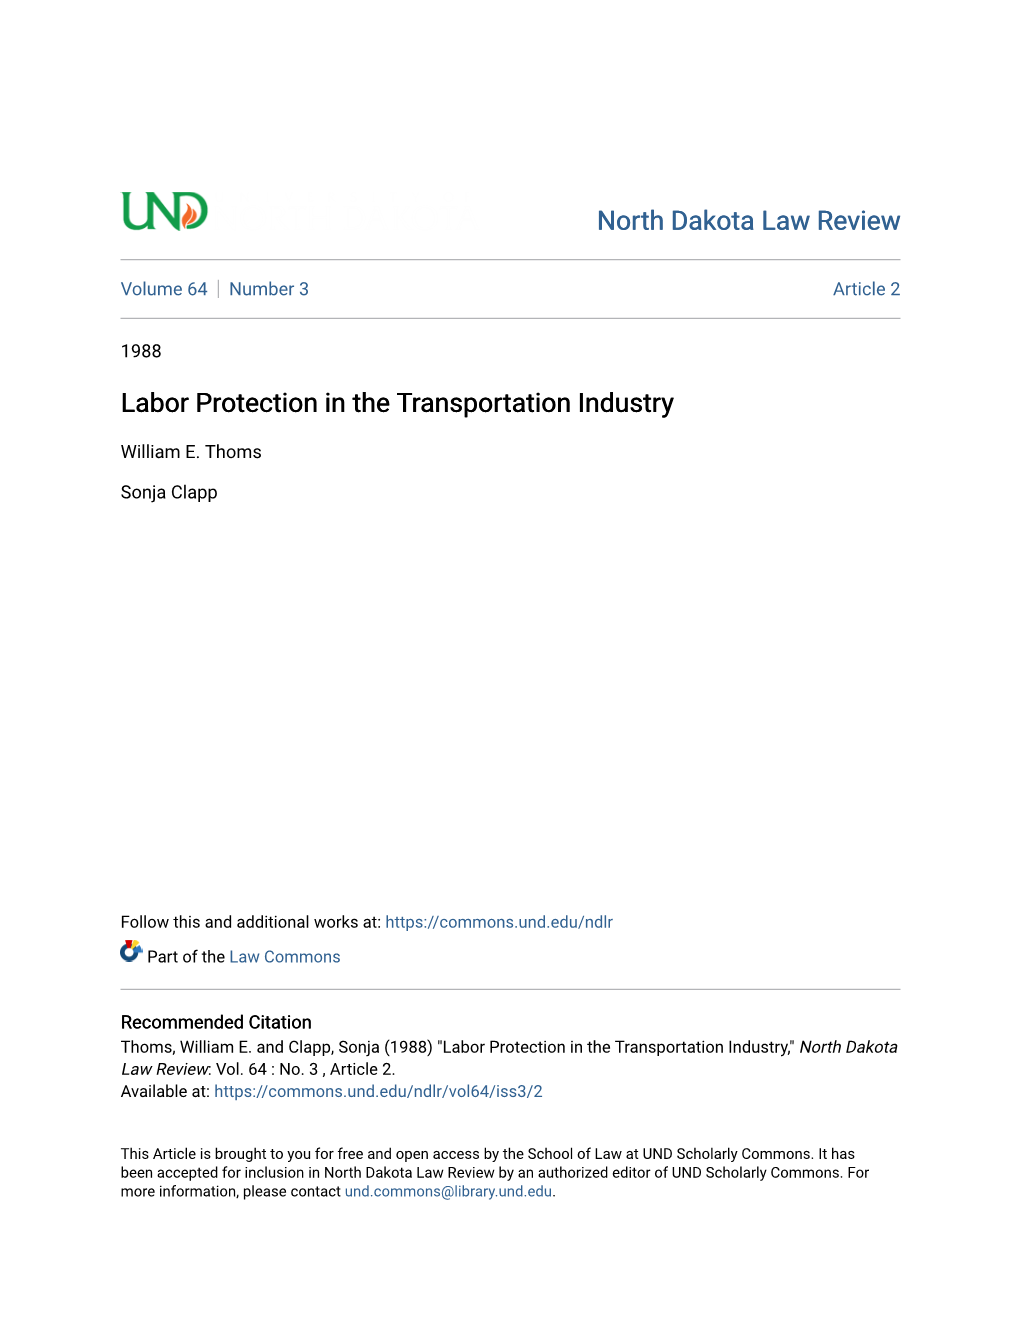 Labor Protection in the Transportation Industry